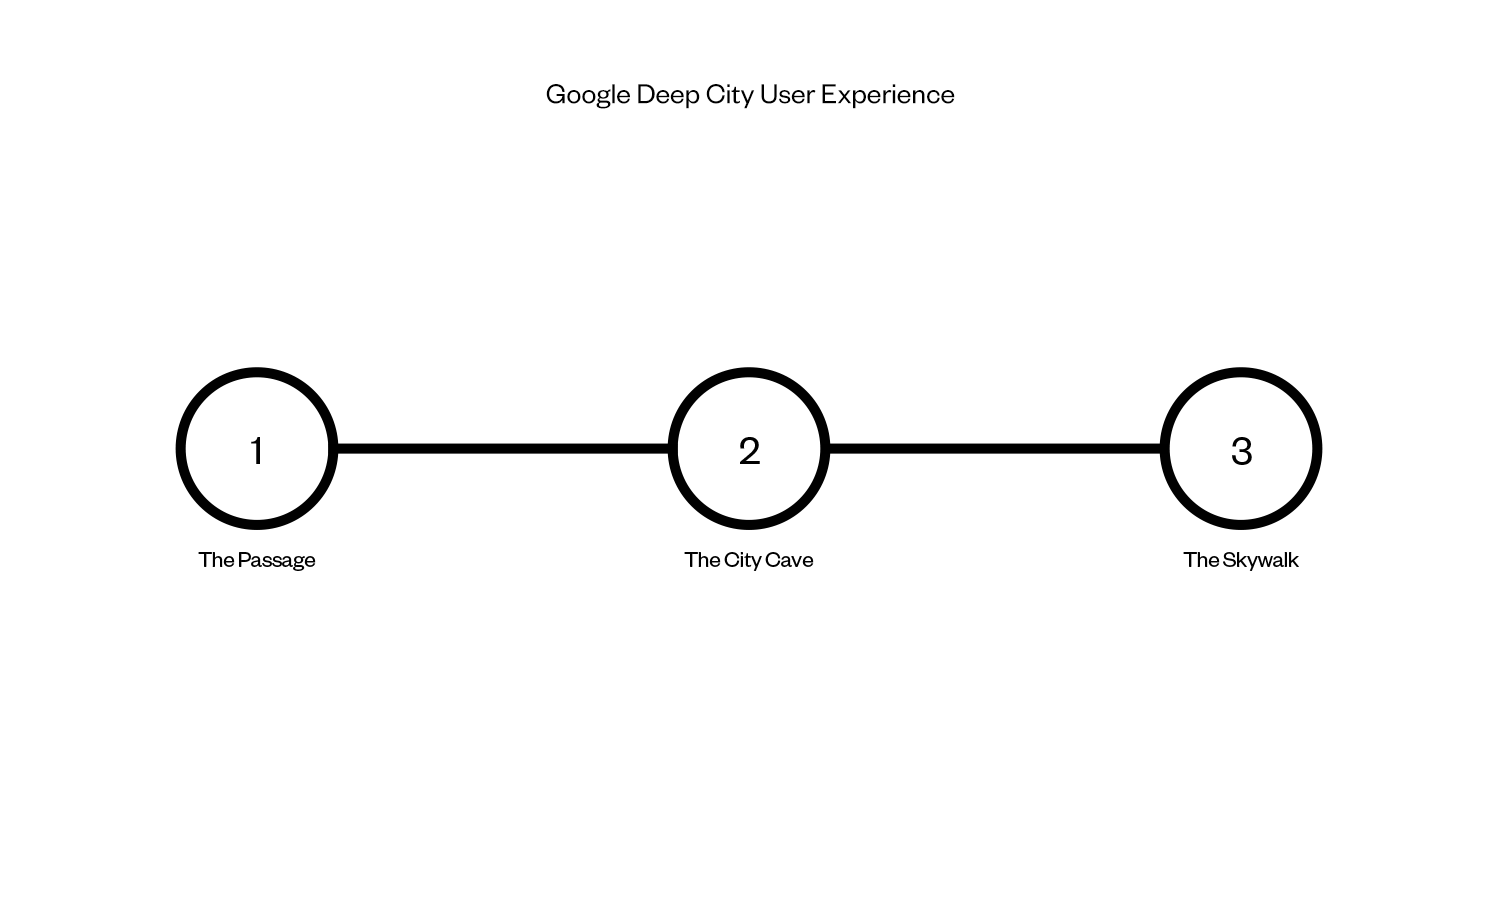 southeaststate_Google_deepcity_user_experience copy.png